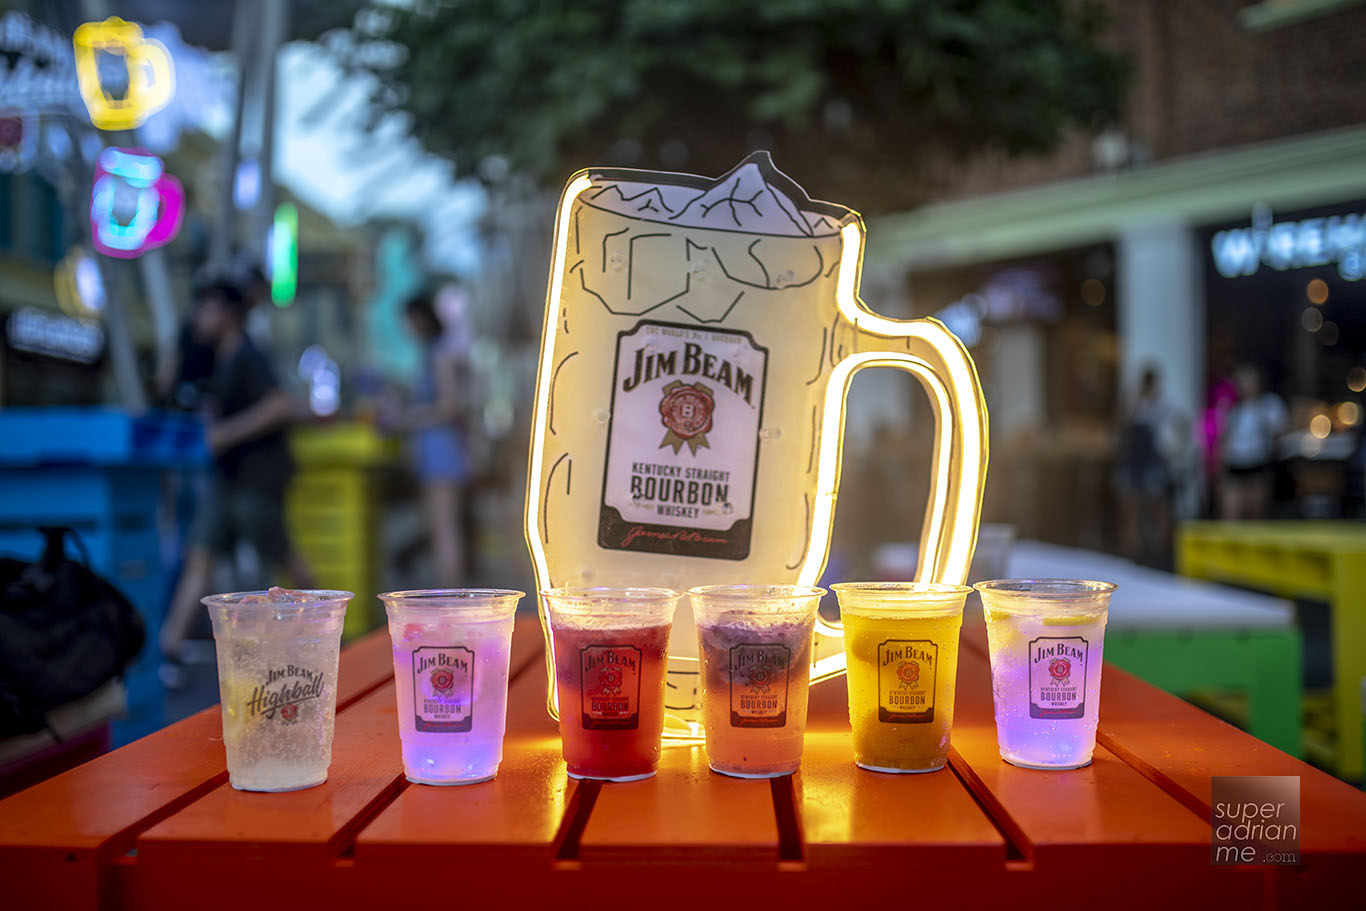 Jim Beam High Ball Pop Up 9 to 13 October 2018 at Clarke Quay Fountain Area